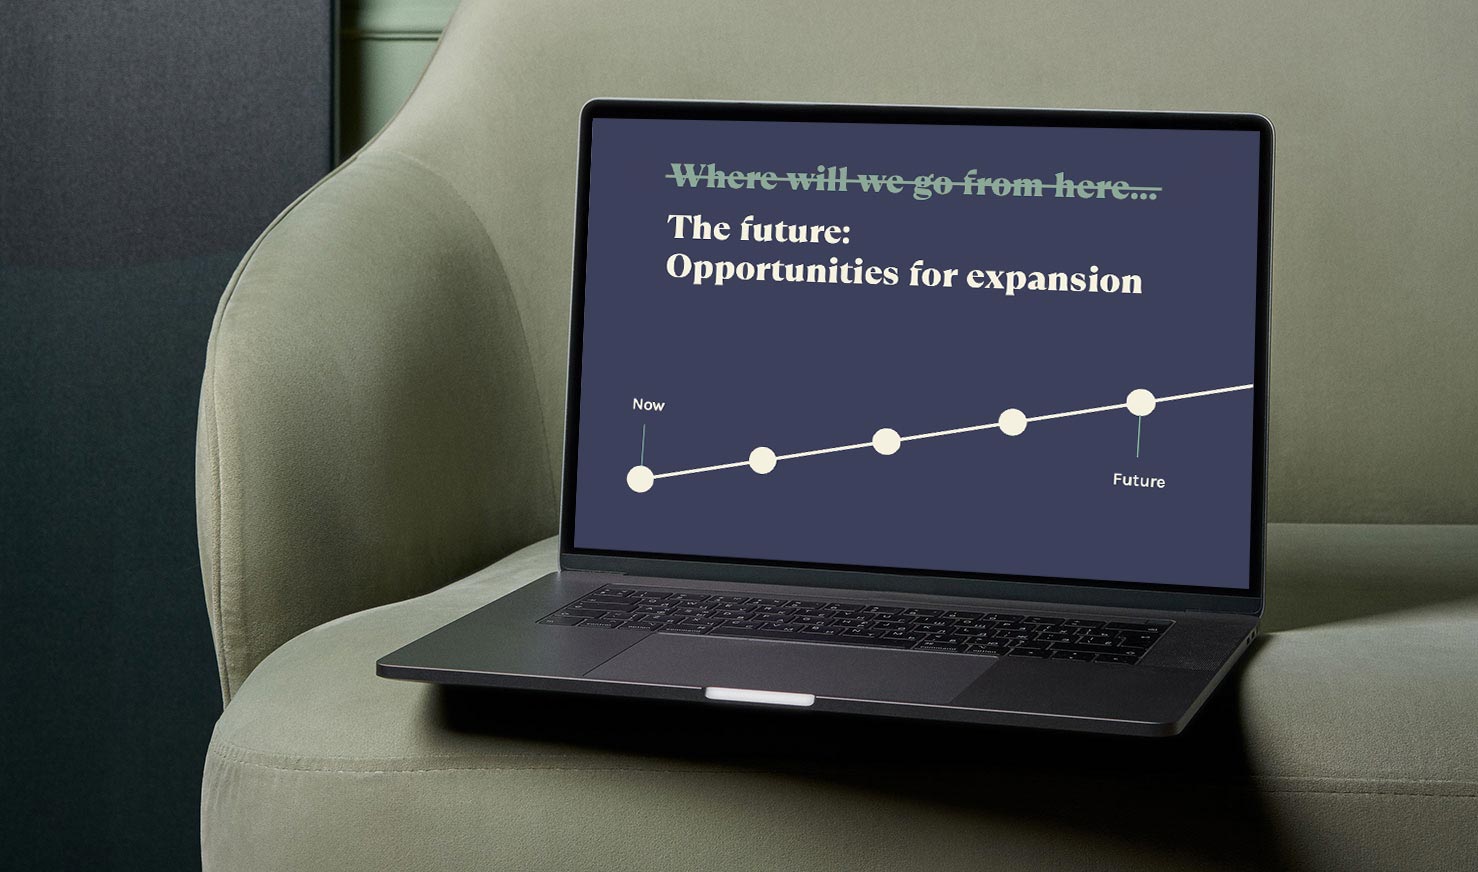 laptop on sofa showing a presentation slide with a headline that reads "The future: Opportunities for expansion